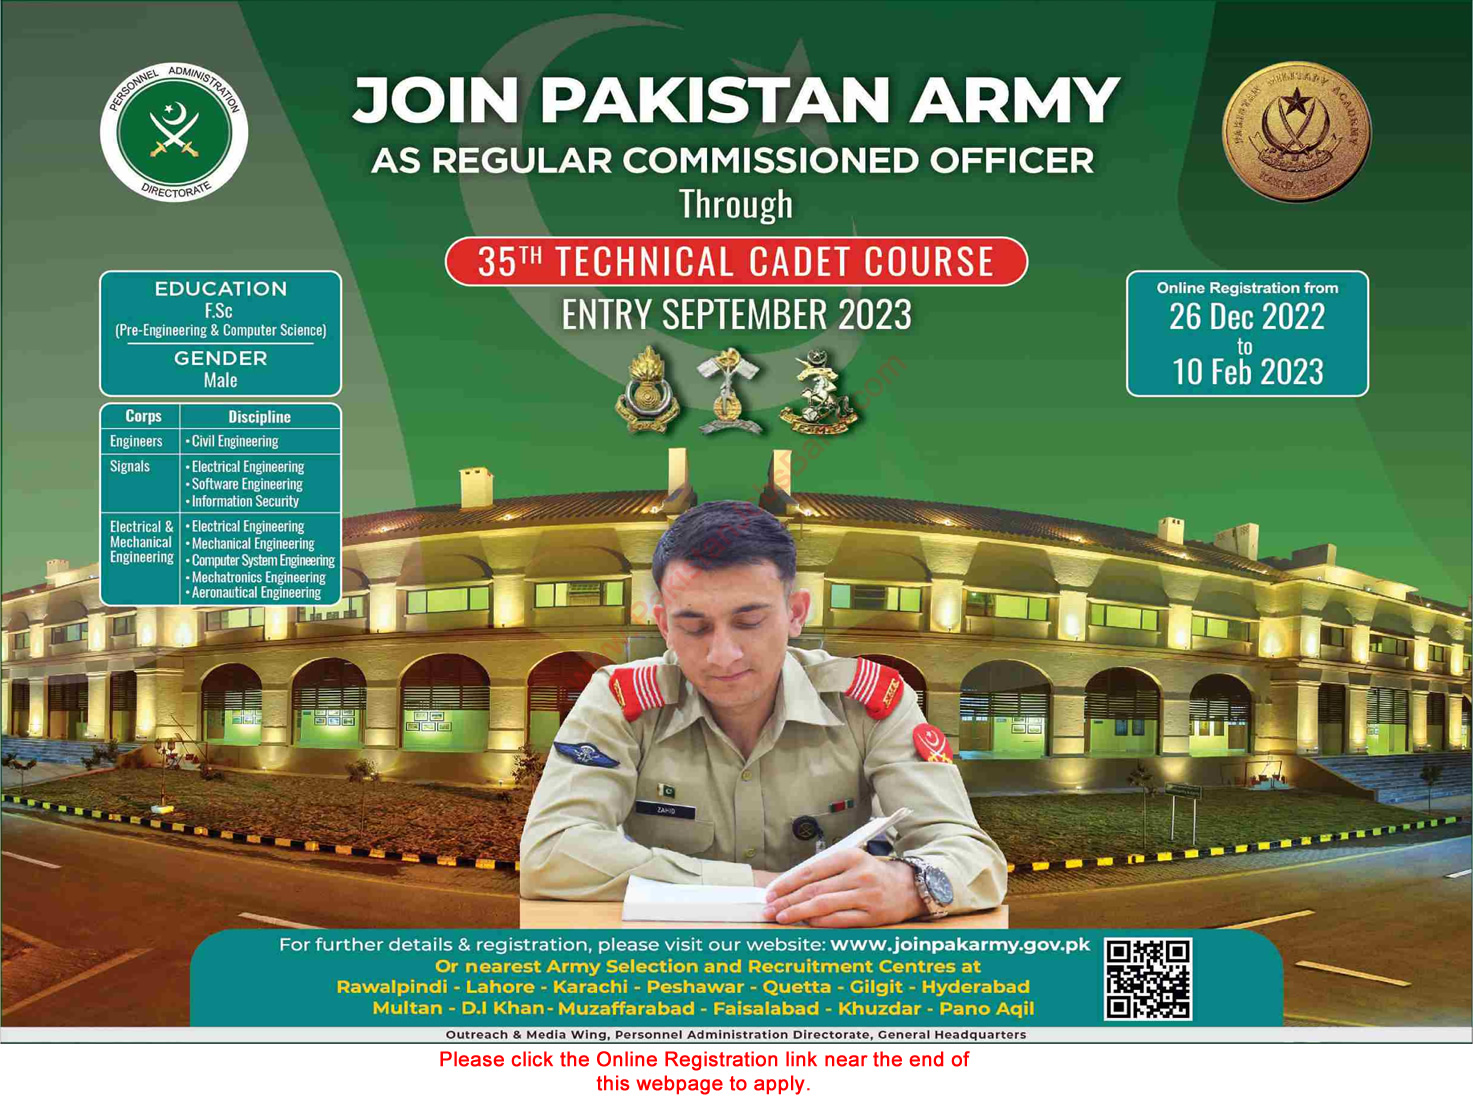 Join Pakistan Army through 35th Technical Cadet Course December 2022 / 2023 Online Registration as Regular Commissioned Officer Latest